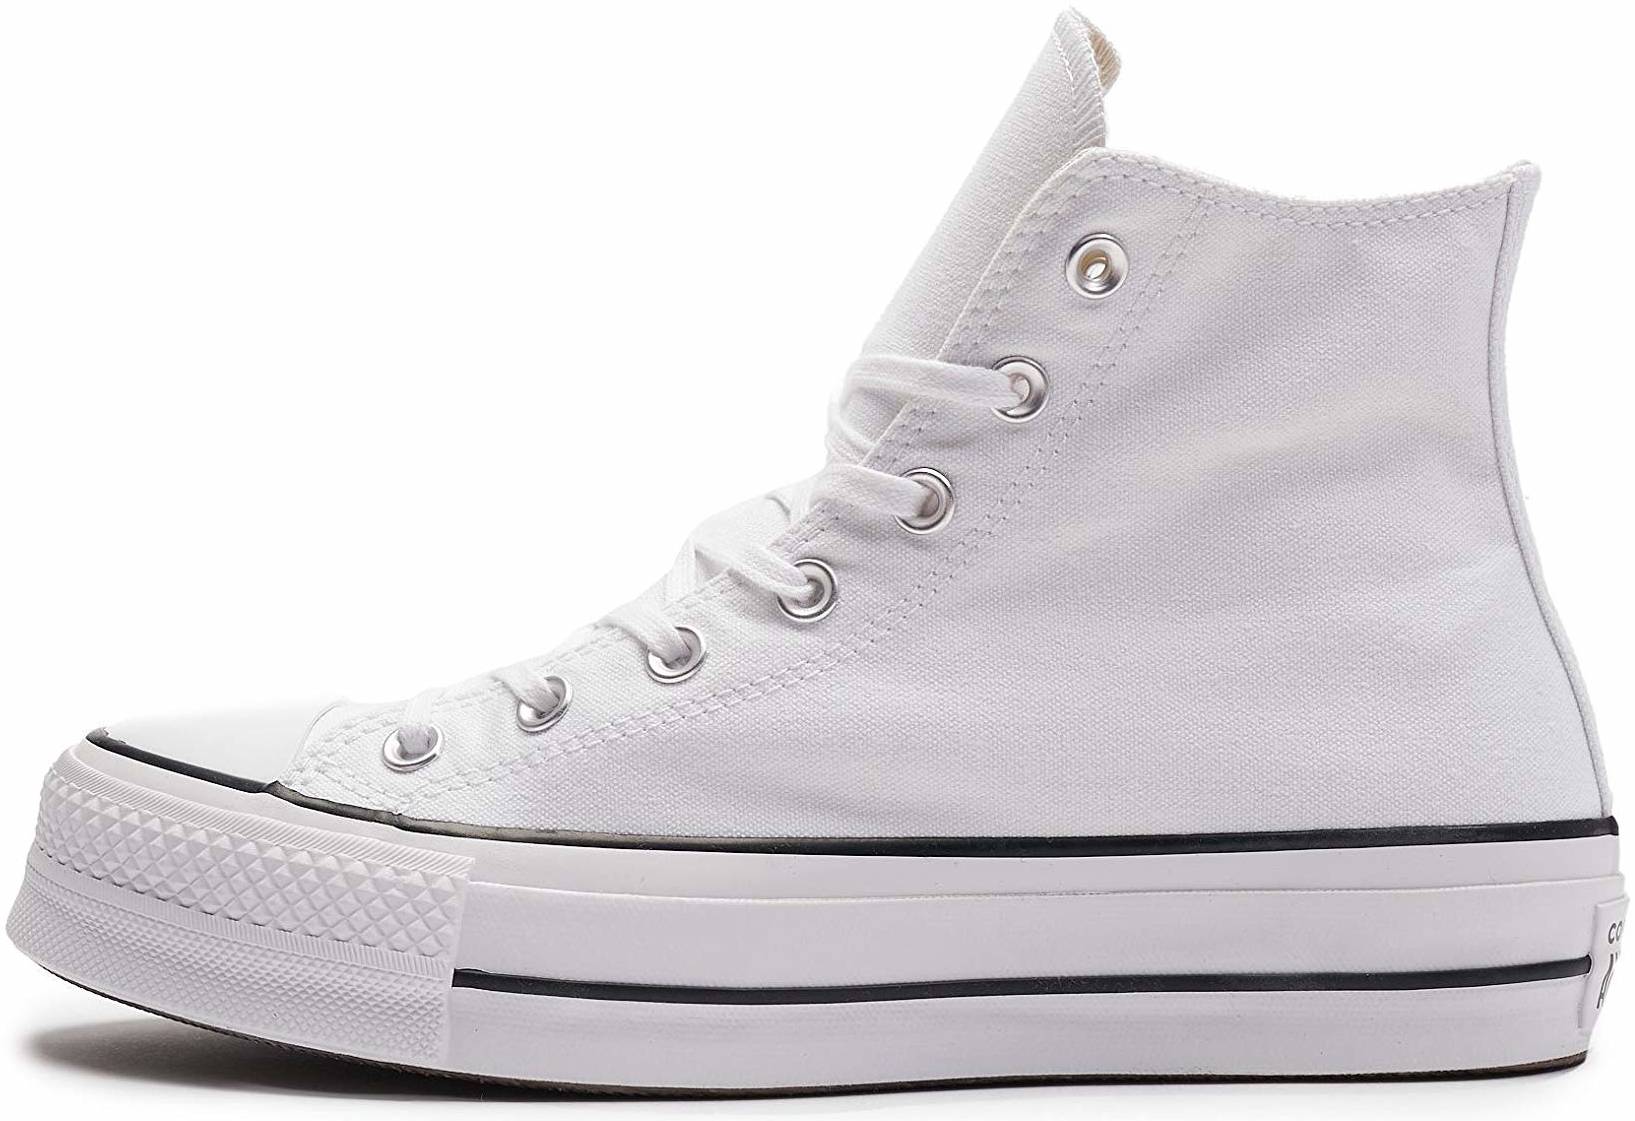 Converse Chuck Taylor All Star Platform High Top sneakers in white ...